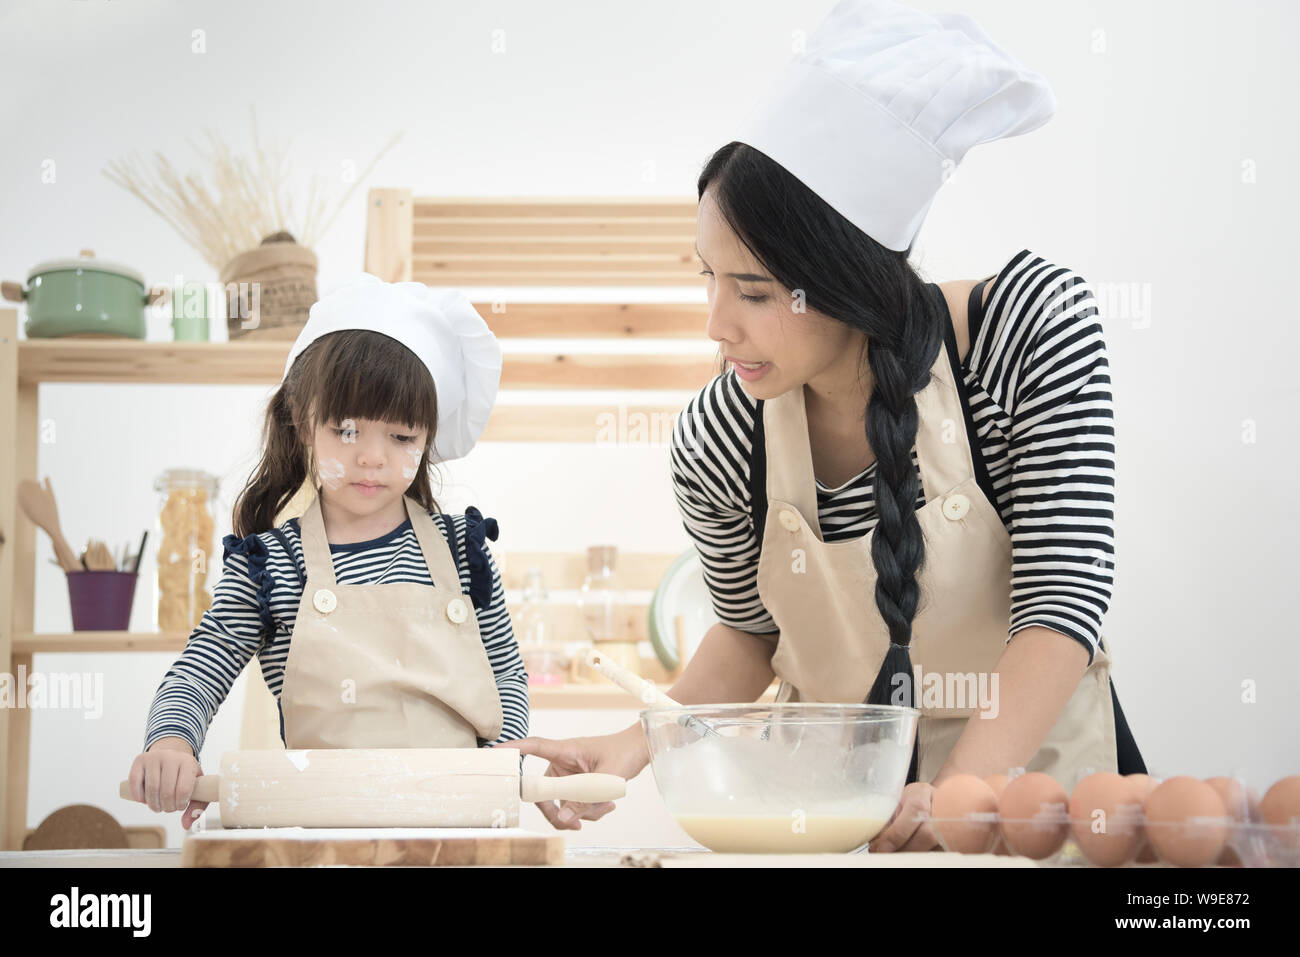 Asian mother and her daughter are preparing the dough to make a cake in the kitchen room on vacation.Photo series of Happy family concept. Stock Photo